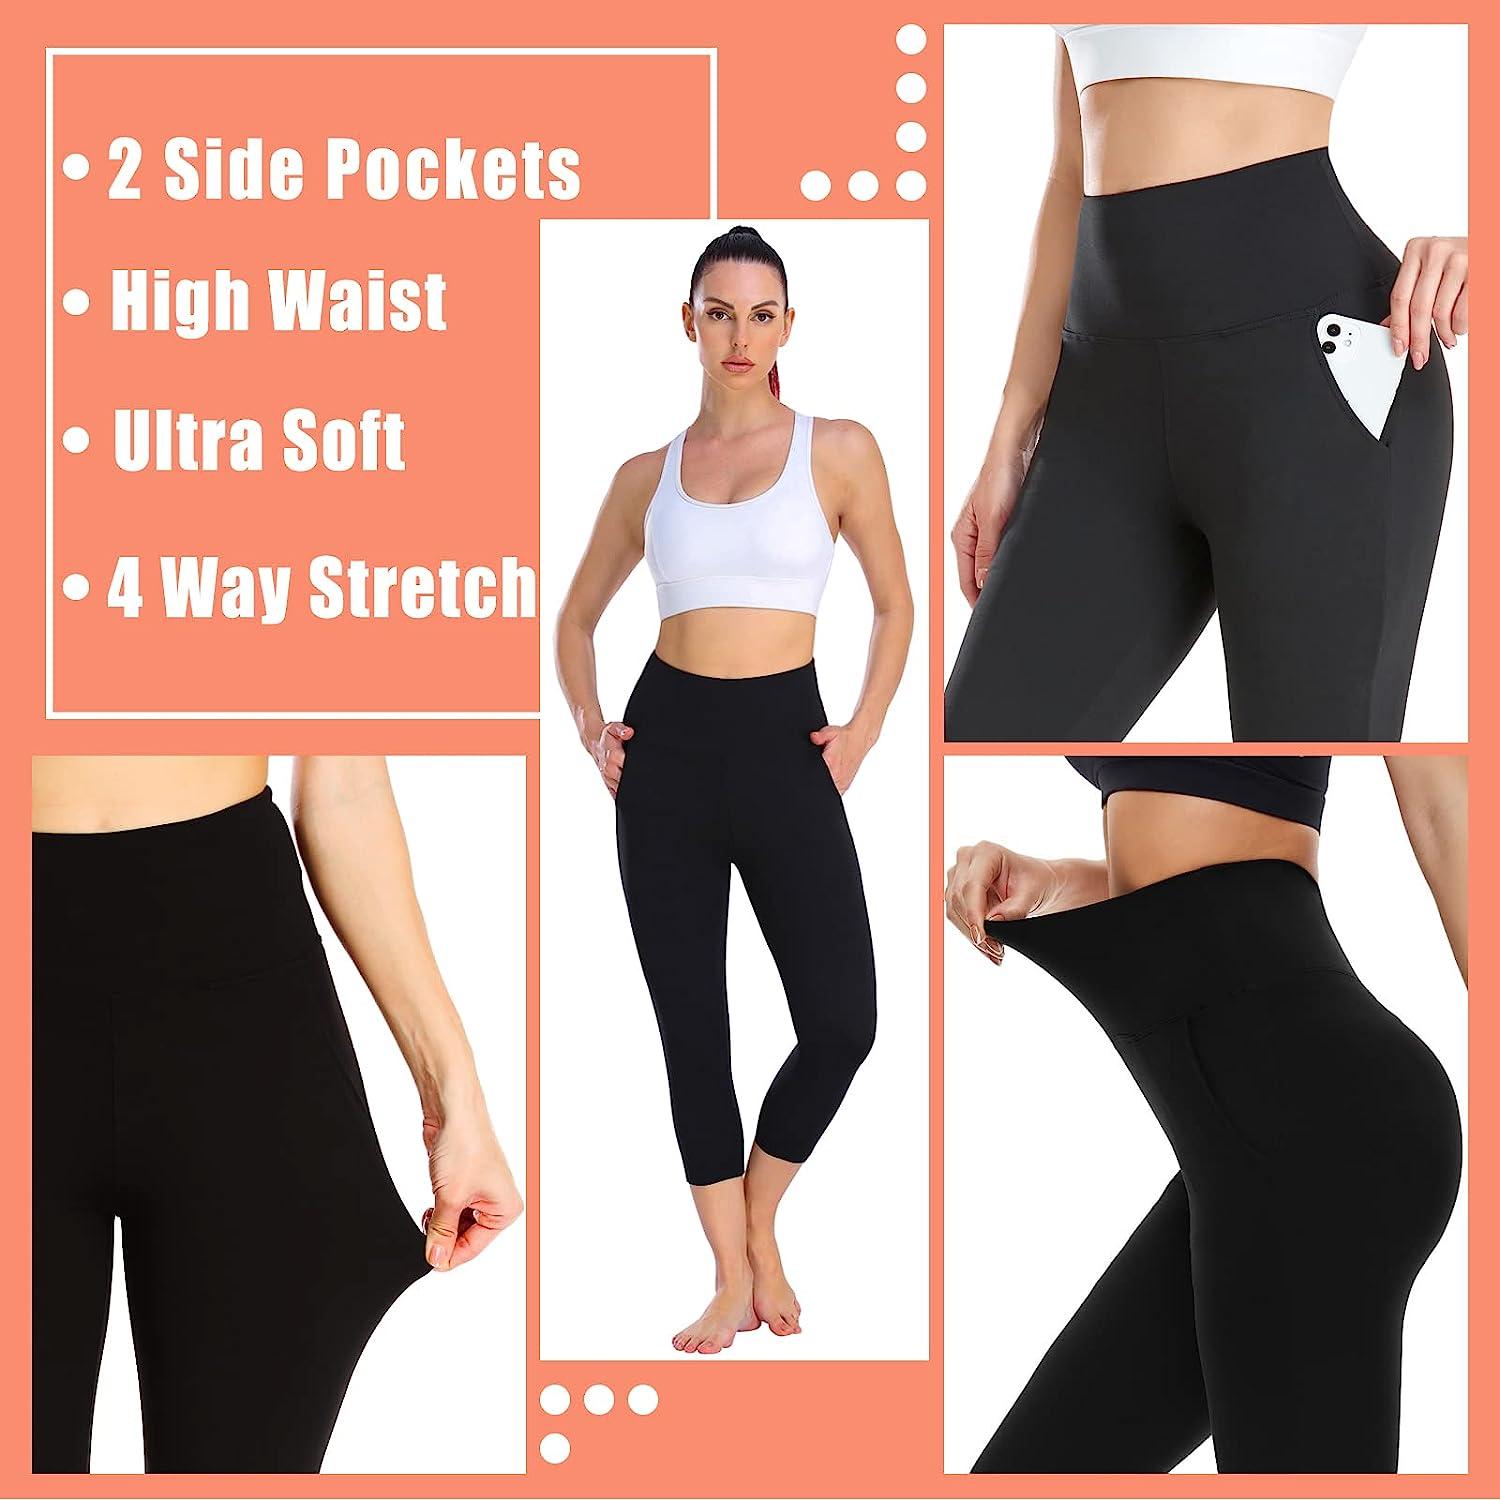 NEW YOUNG Capri Leggings with Pockets for Women High Waisted Workout  Leggings Tummy Control Yoga Pants XX-Large 2-white